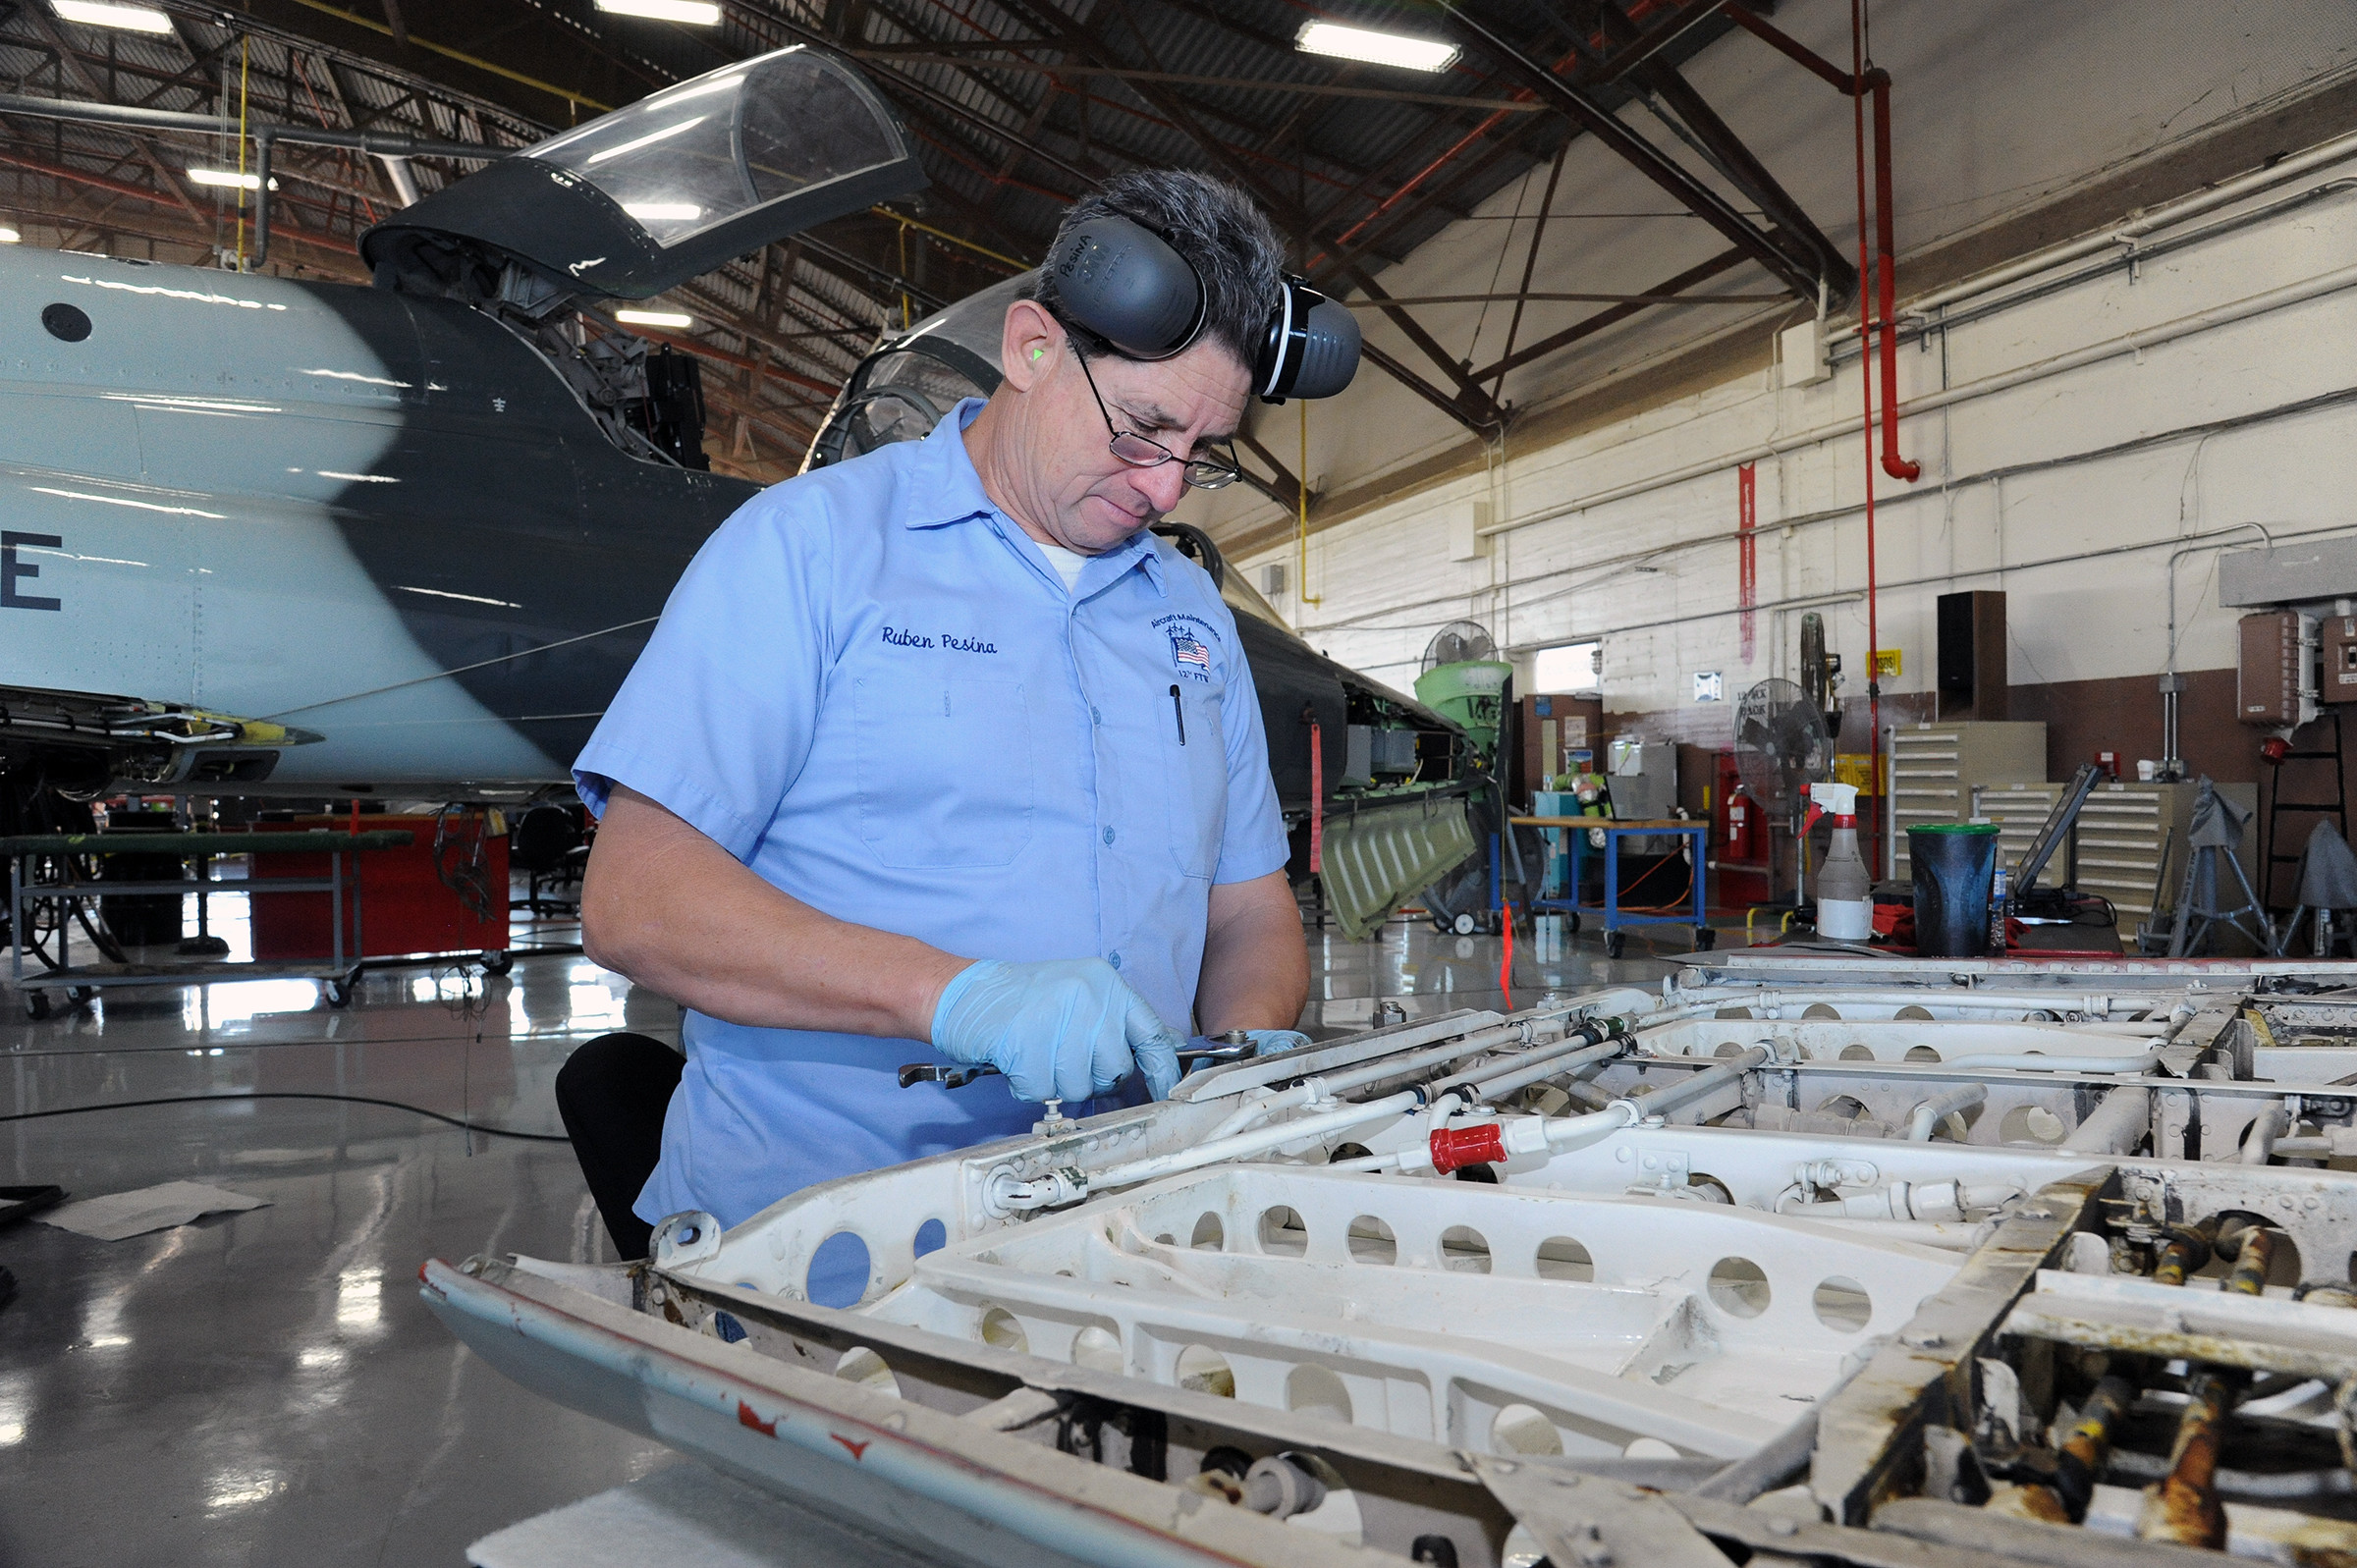 activation-ceremony-heralds-new-chapter-in-trainer-aircraft-maintenance-story-air-education